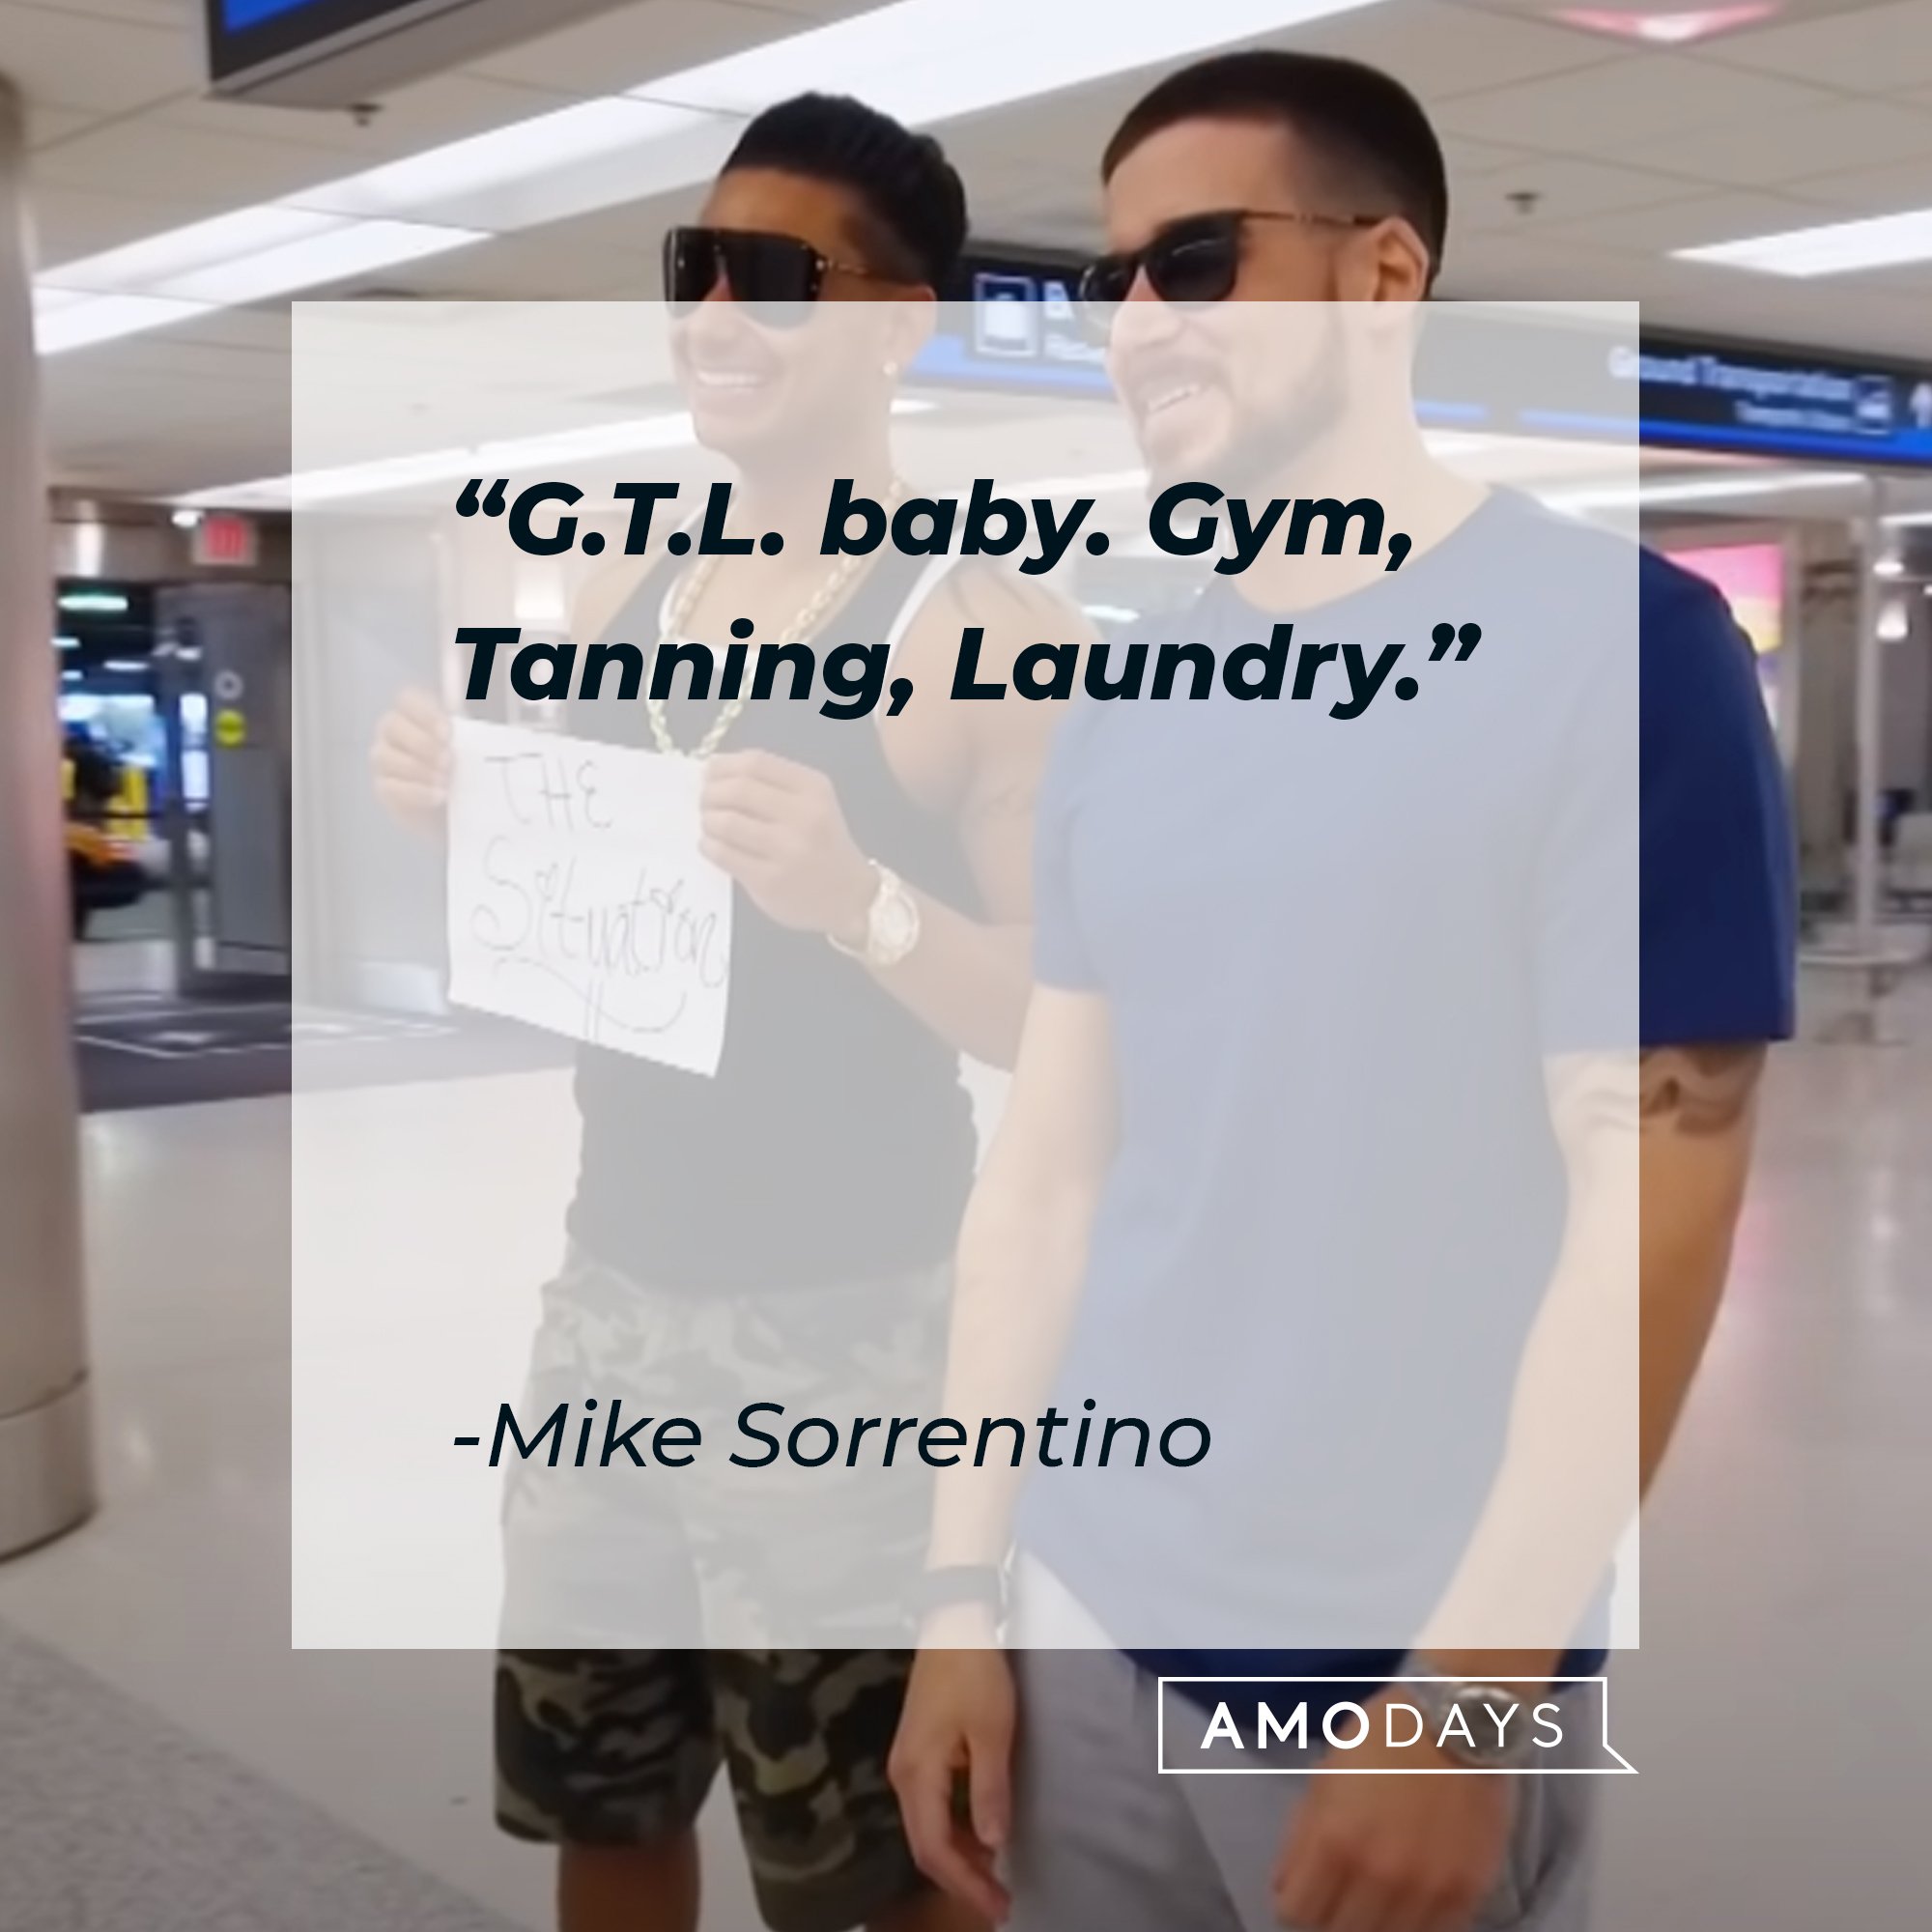 Mike Sorrentino’s quote: "G.T.L. baby. Gym, Tanning, Laundry." | Image: AmoDays